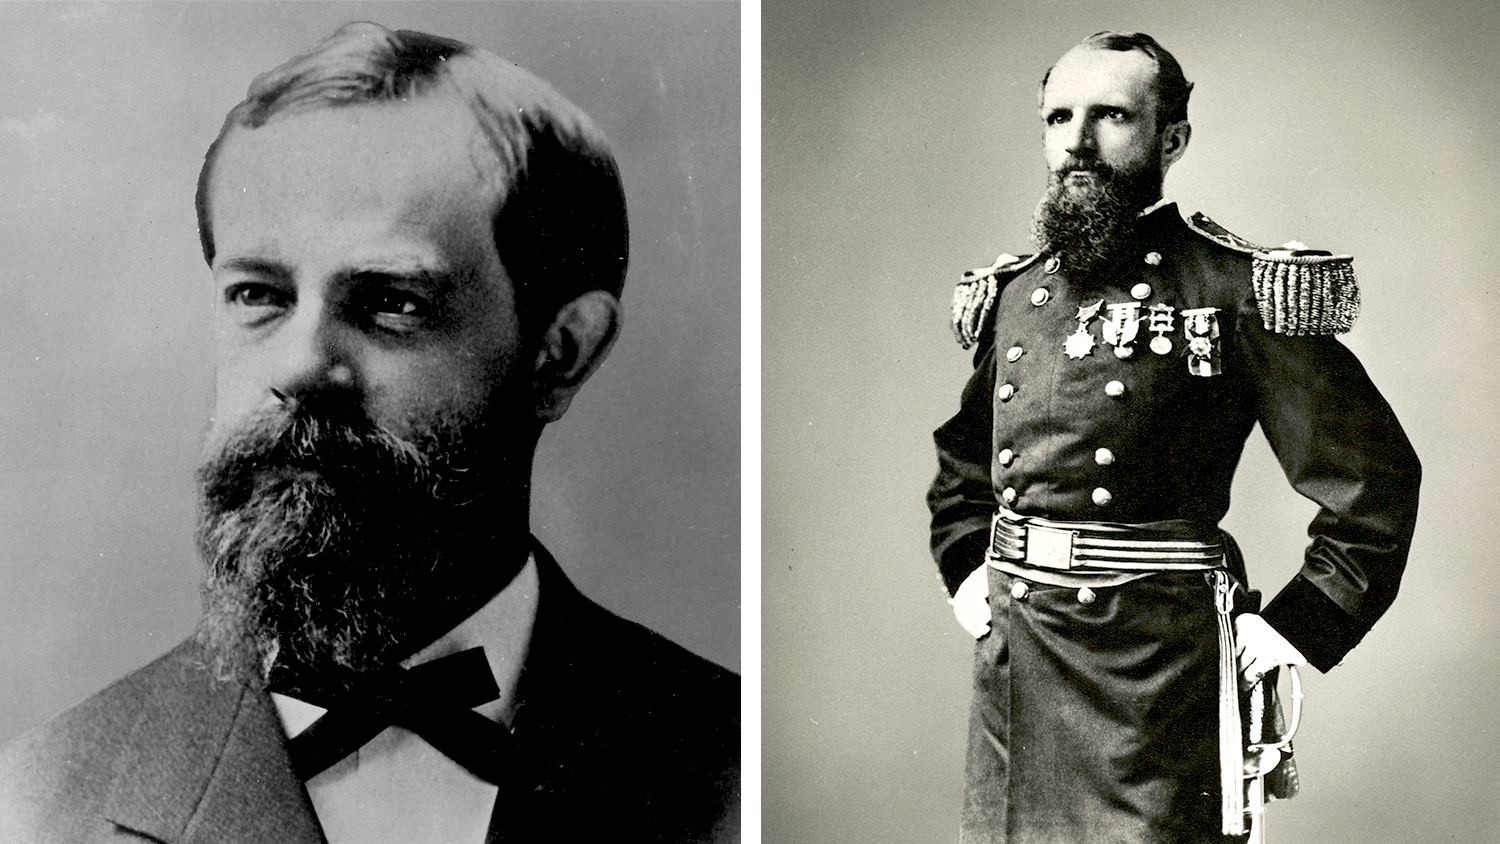 Colonel W.C. Church and General George W. Wingate